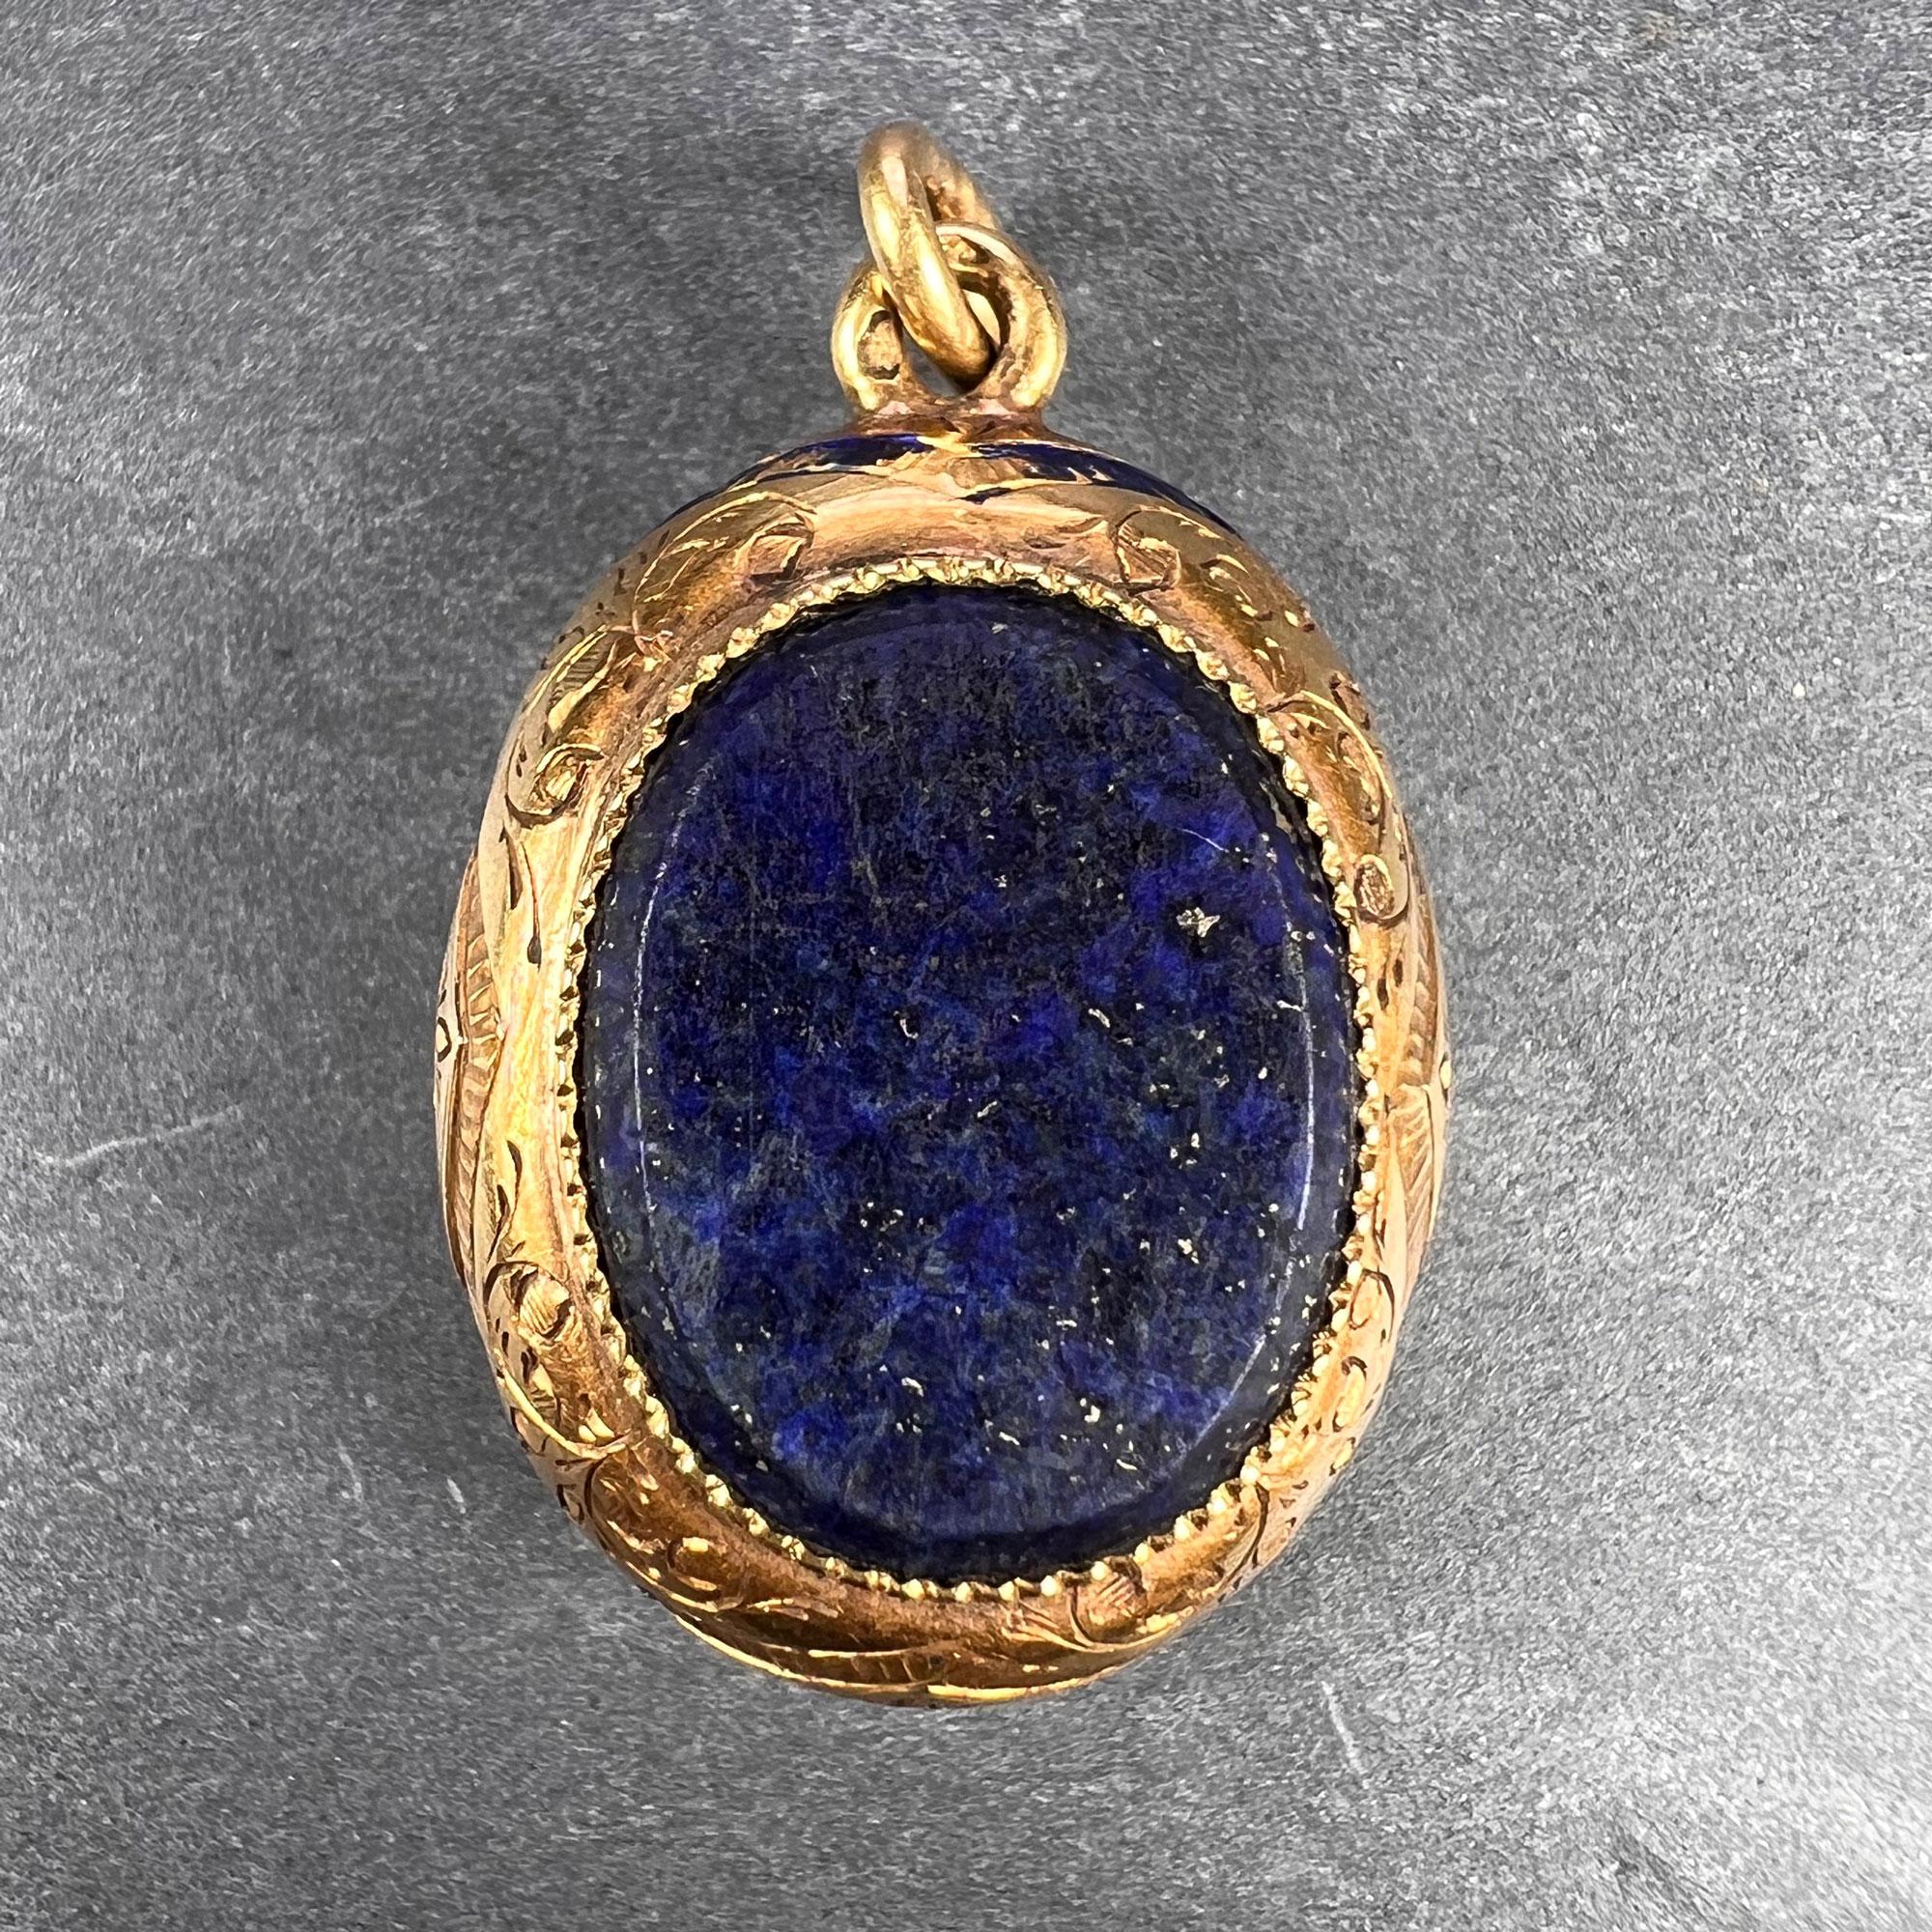 An antique French 18 karat (18K) yellow gold charm pendant designed as an oval frame with engraved decoration and traces of blue enamel, set to each side with an oval lapis lazuli tablet. Stamped with the eagle mark for 18 karat gold and French